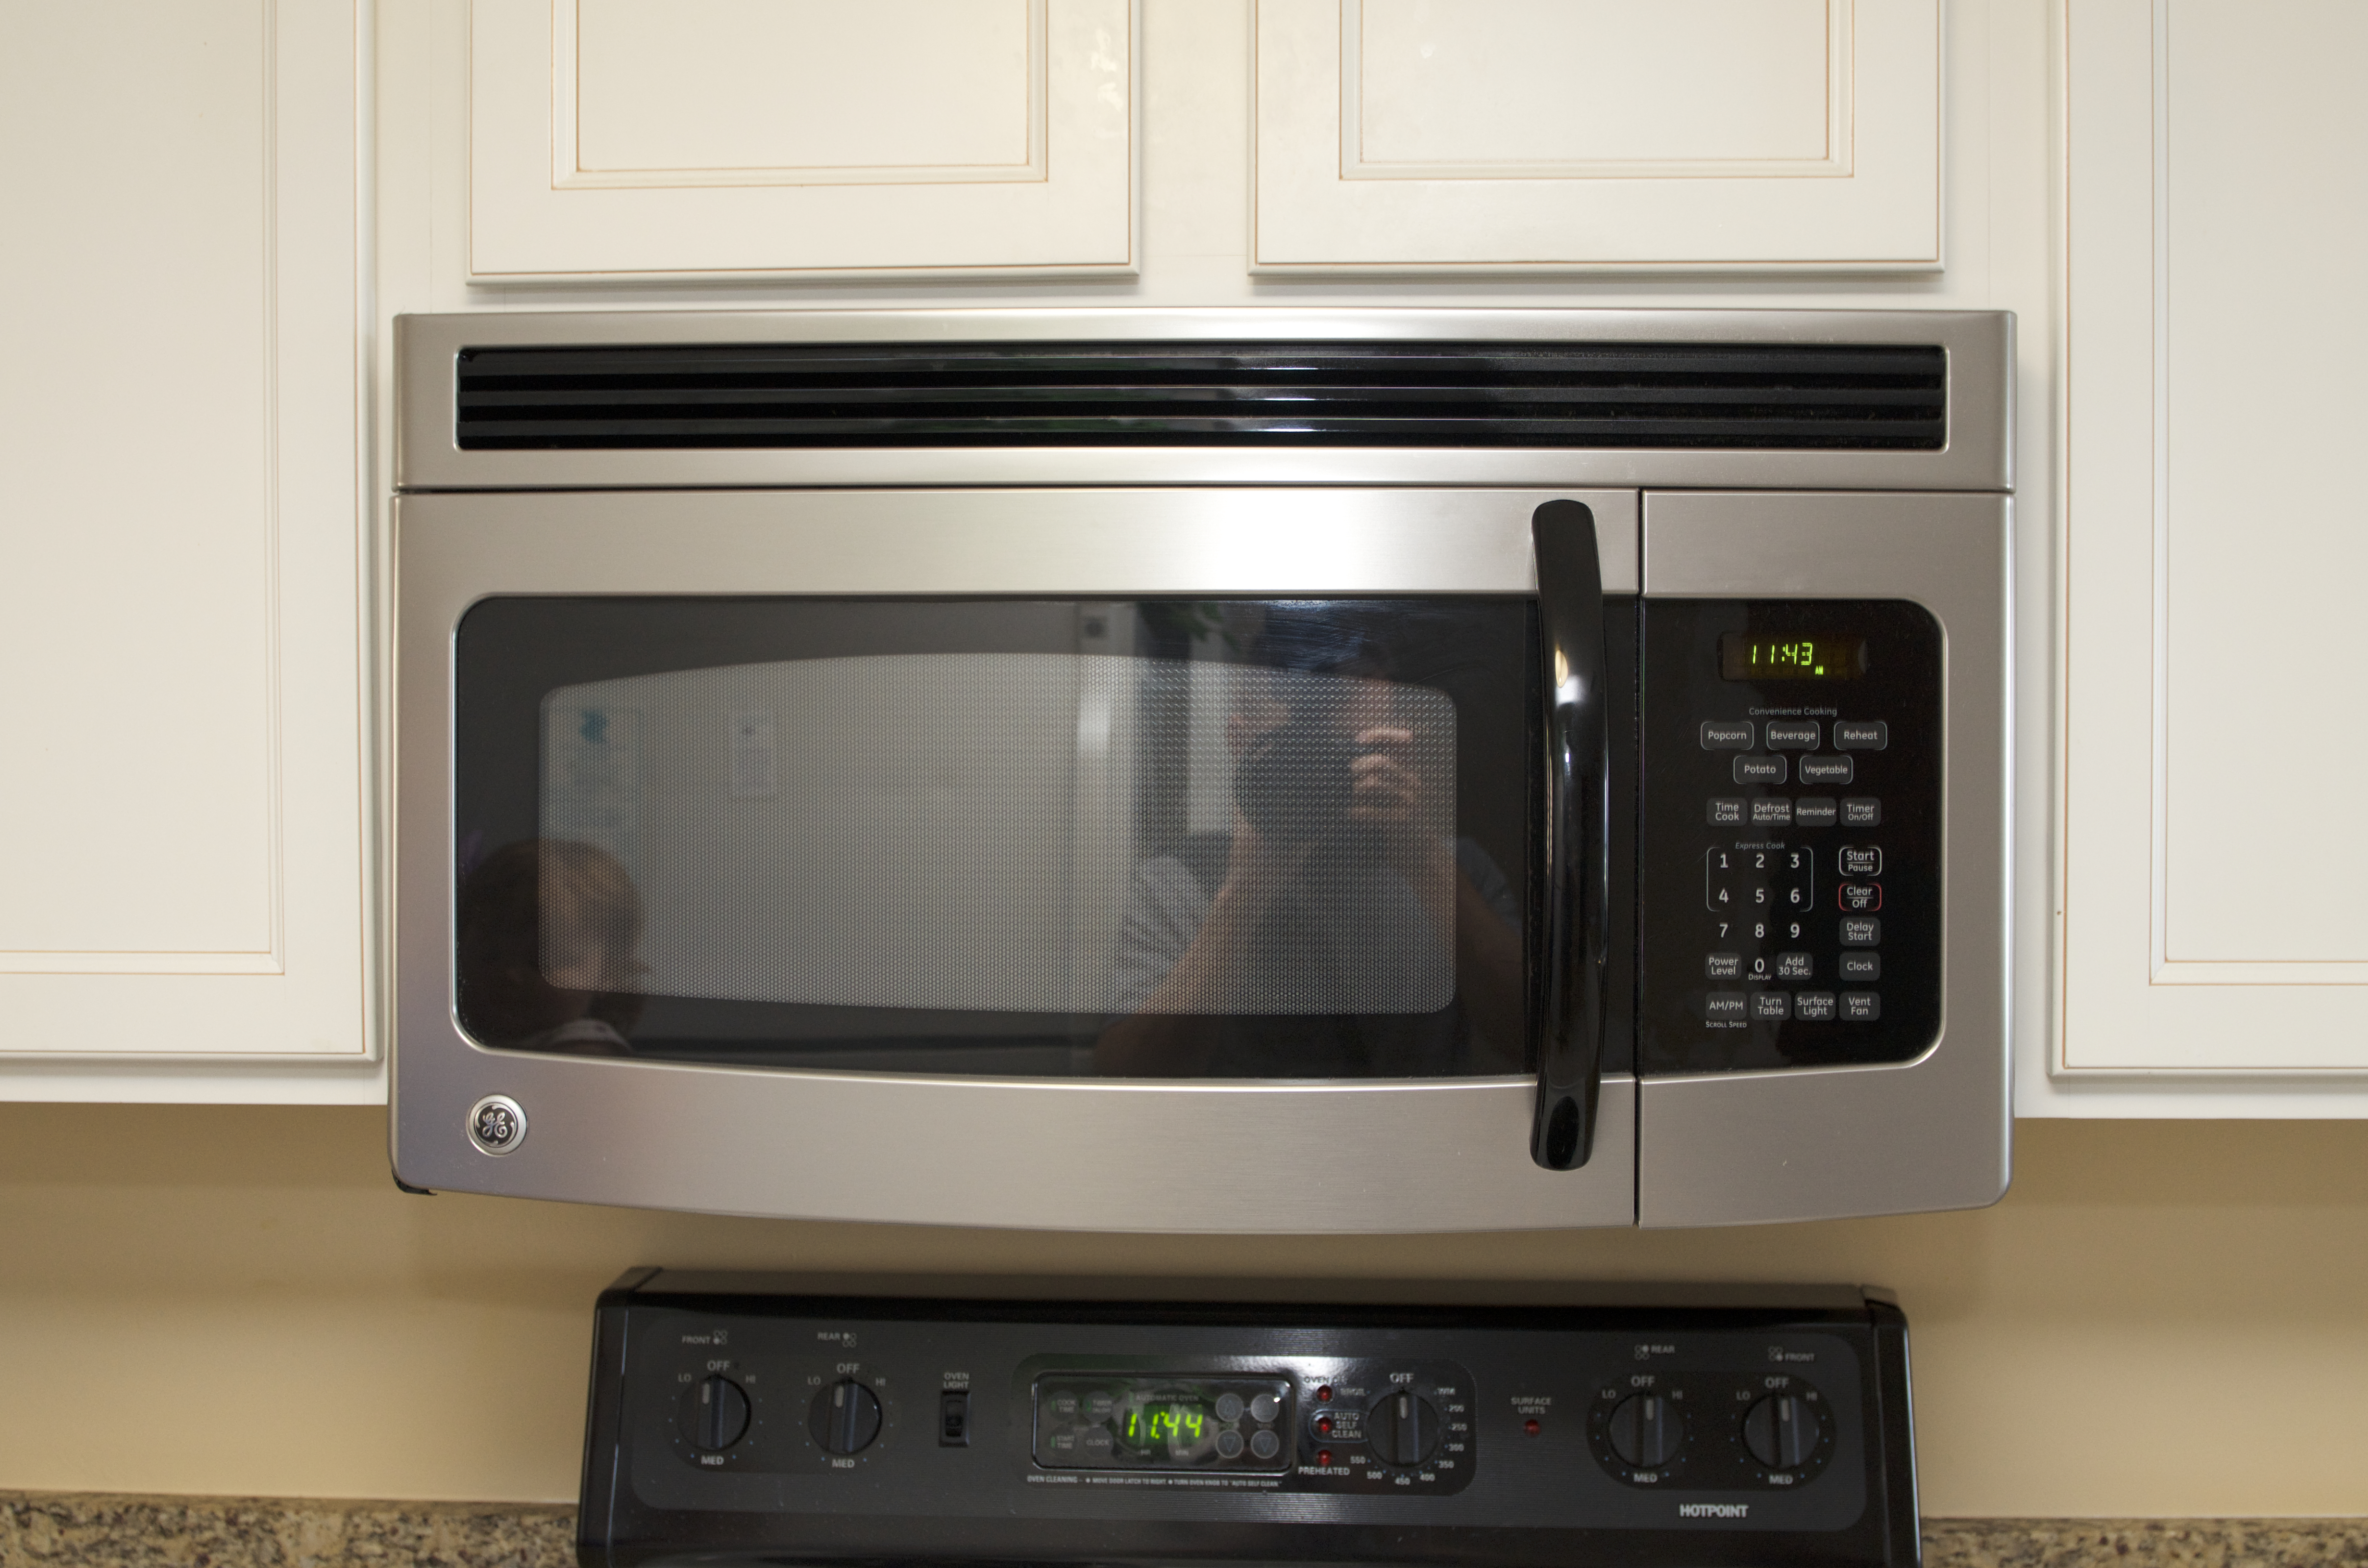 Microwave oven - Wikipedia